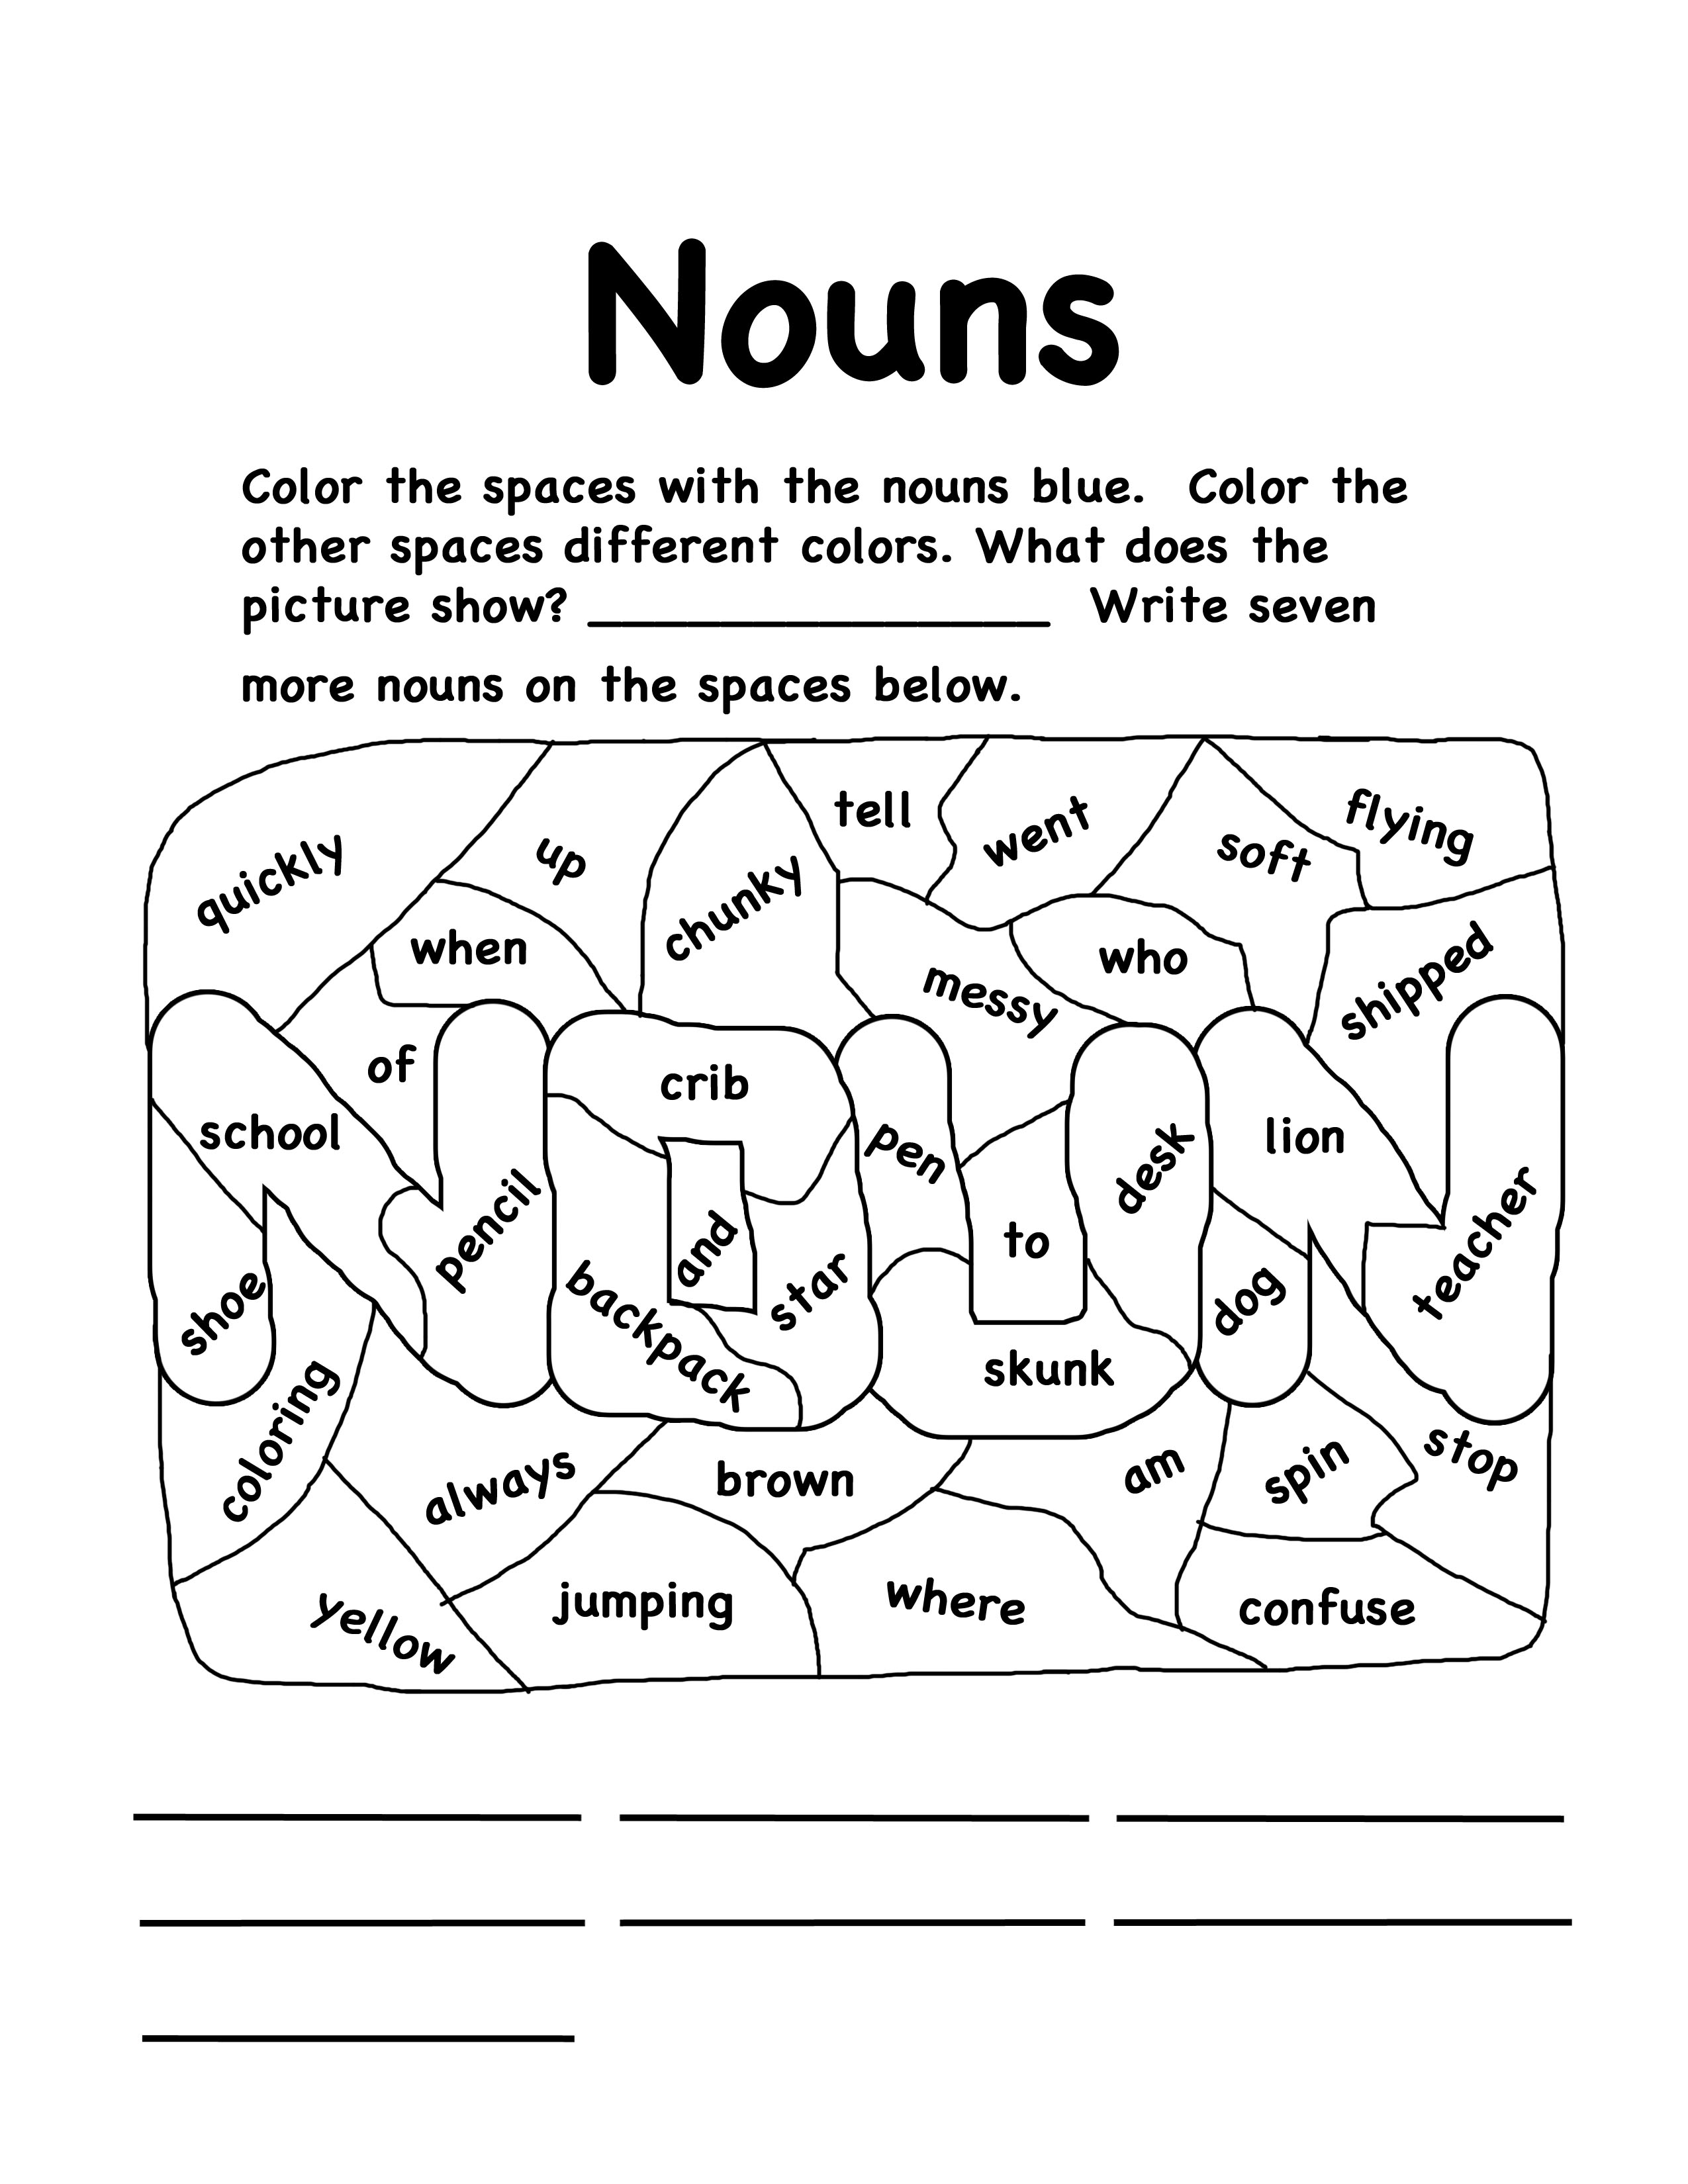 nouns-coloring-reading-and-hidden-images-duo-education-the-path-to-a-brighter-future